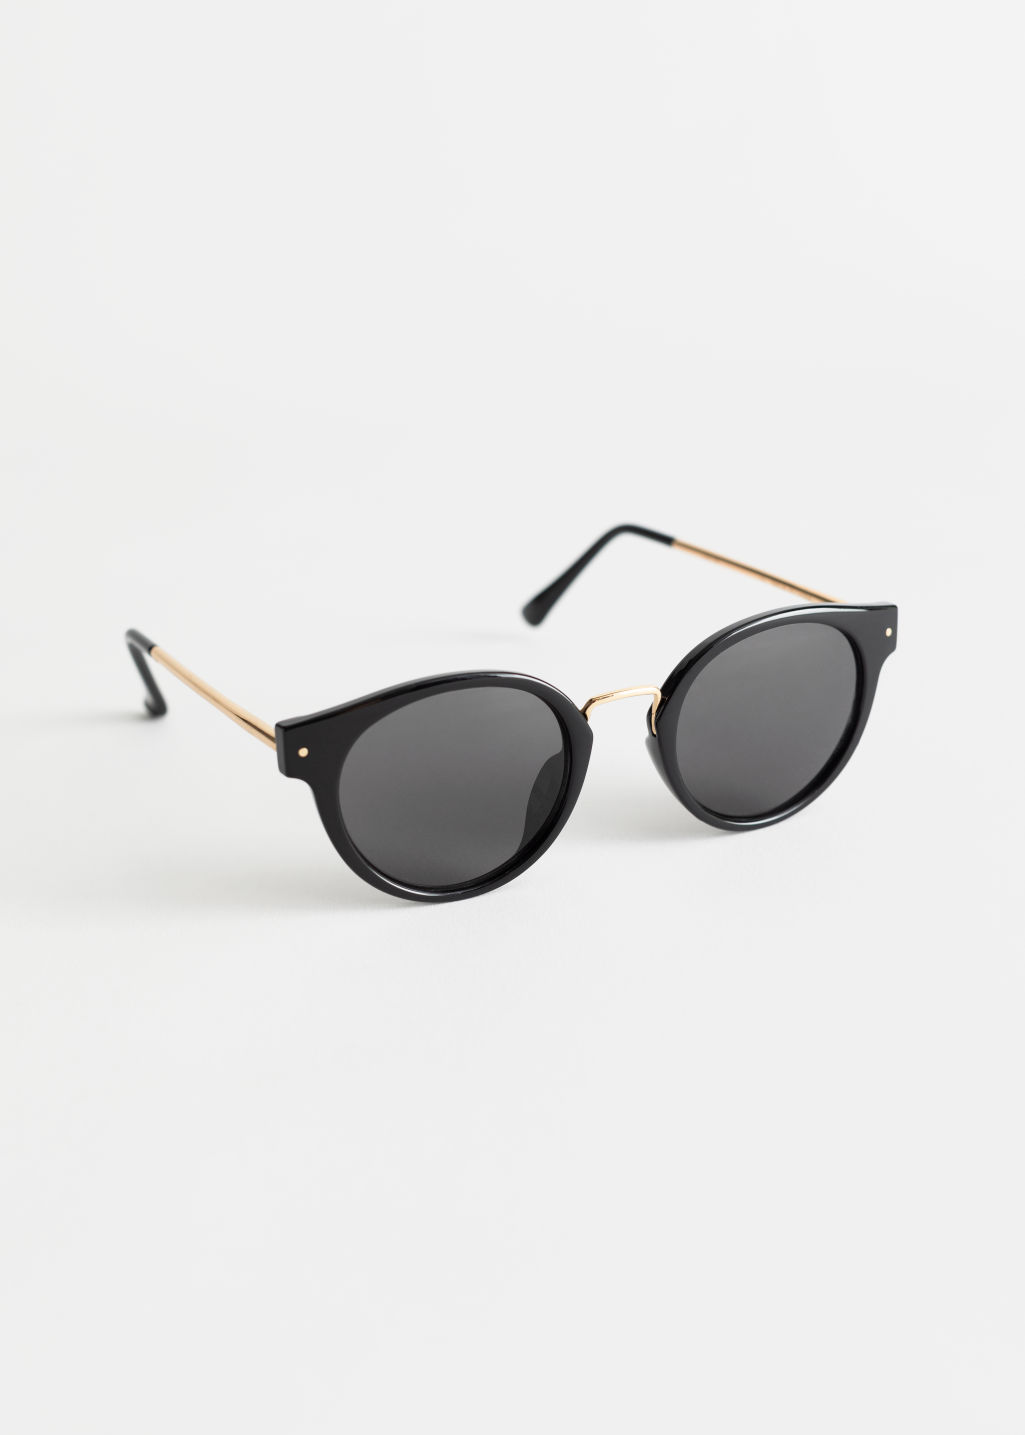 Rounded Gold Bridge Sunglasses - Black - Round frame - & Other Stories